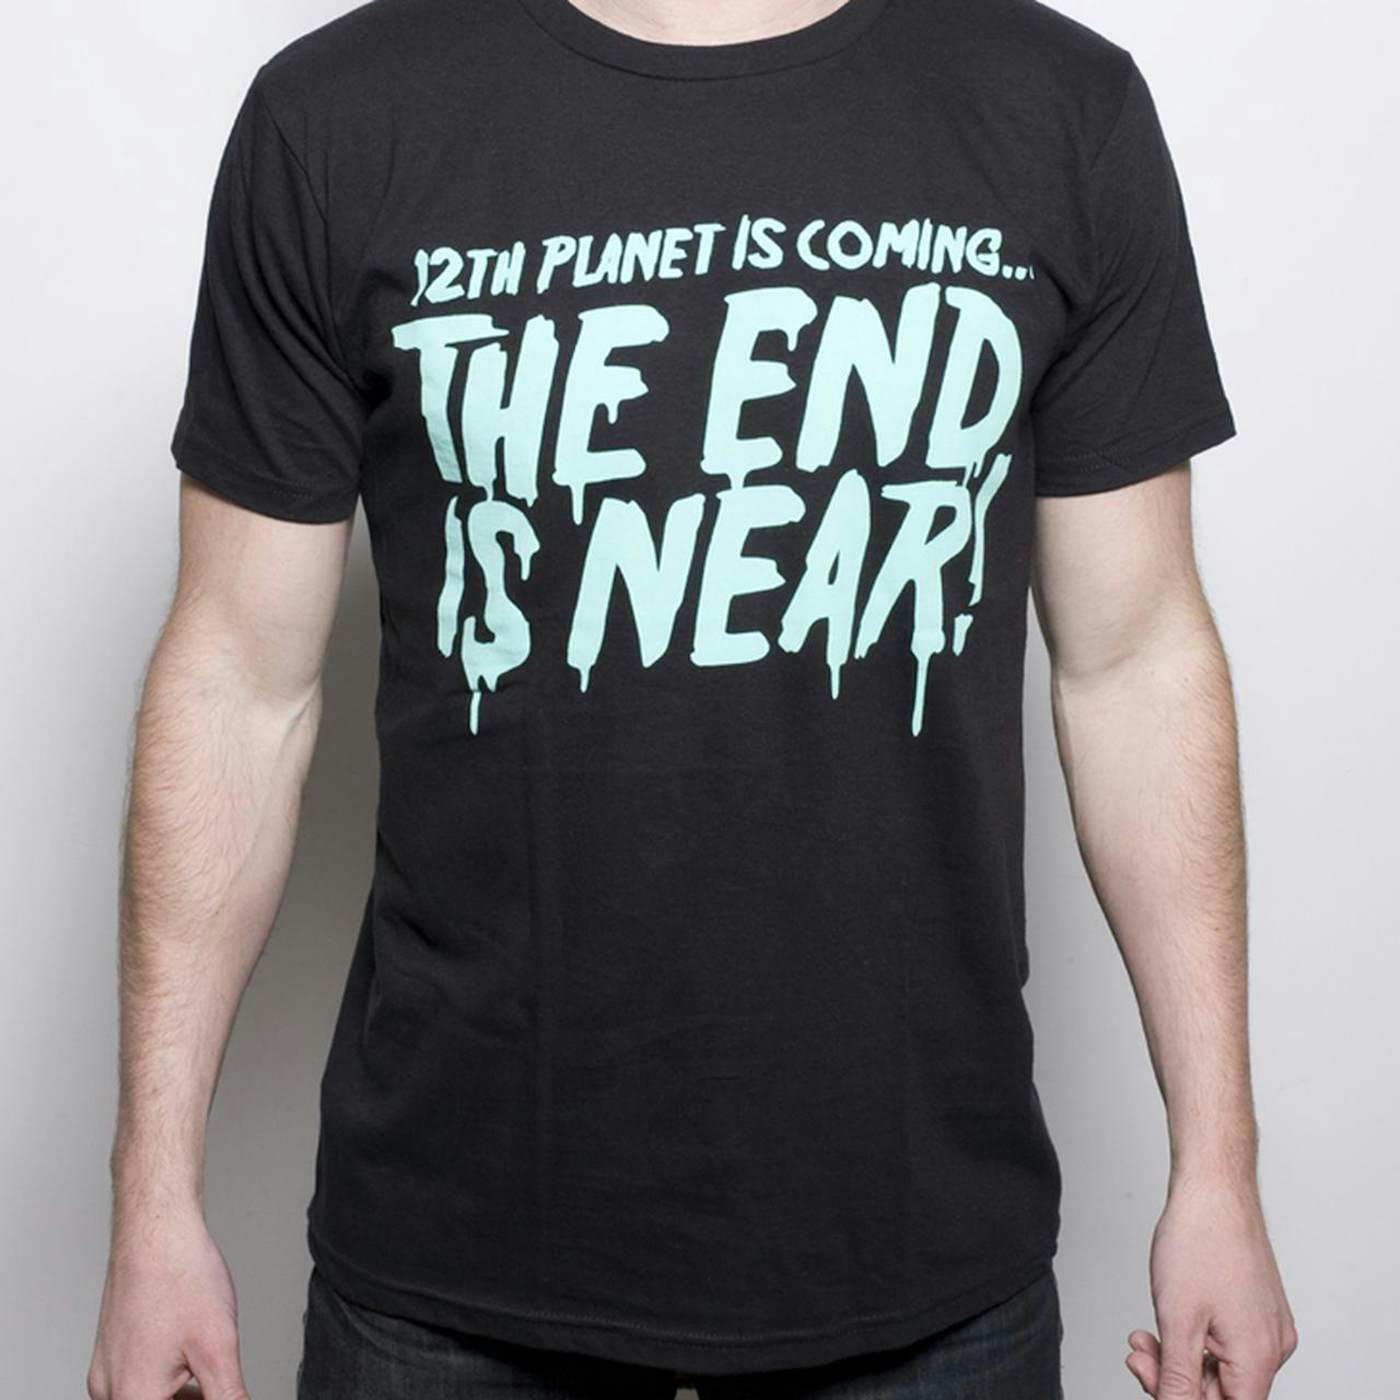 Smog 12th Planet // The End is Near!